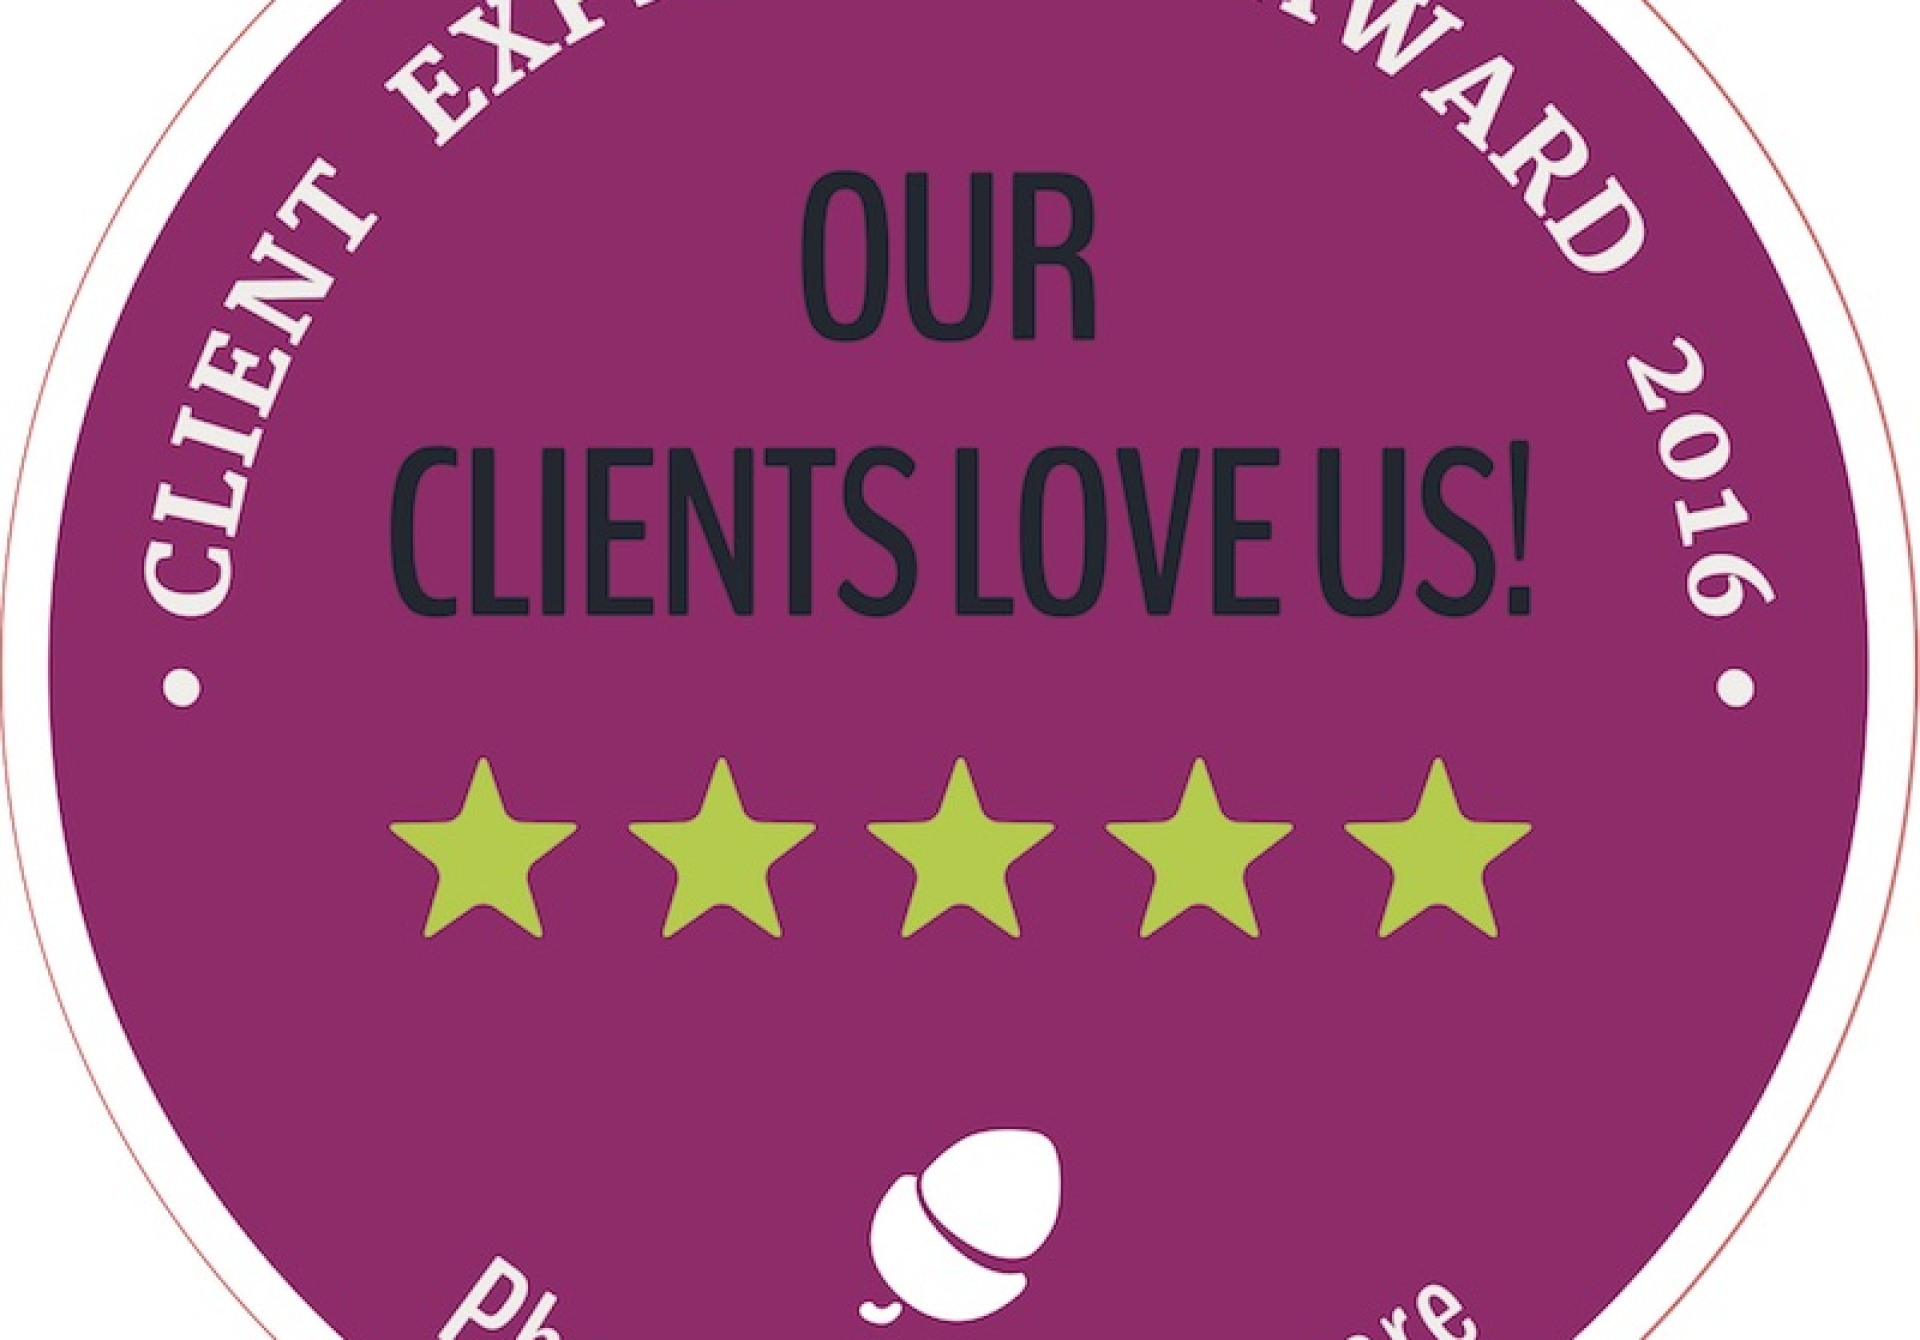 We are really excited we have received “The Client experience Award 2016” We are in the top 3% for UK and Ireland